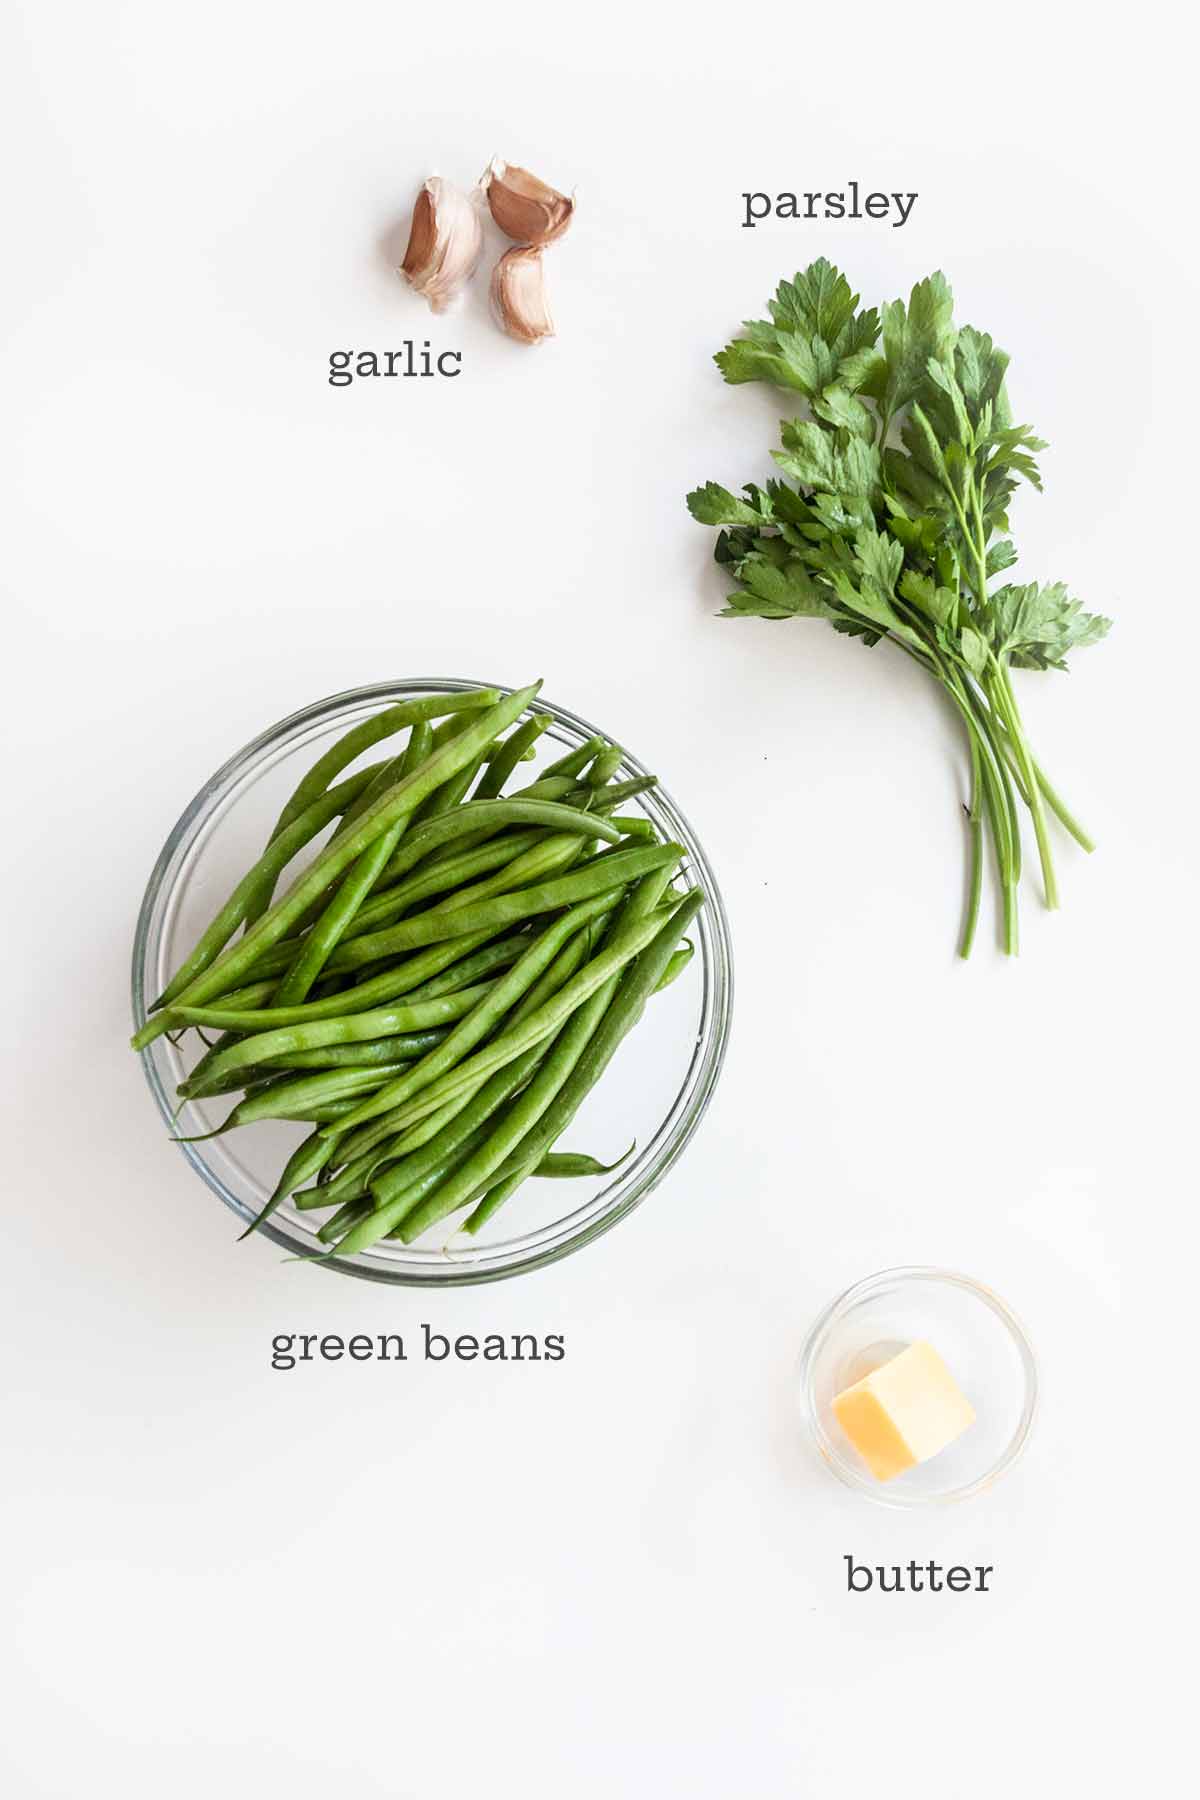 Ingredients for pan-fried green beans--beans, parsley, garlic, and butter.